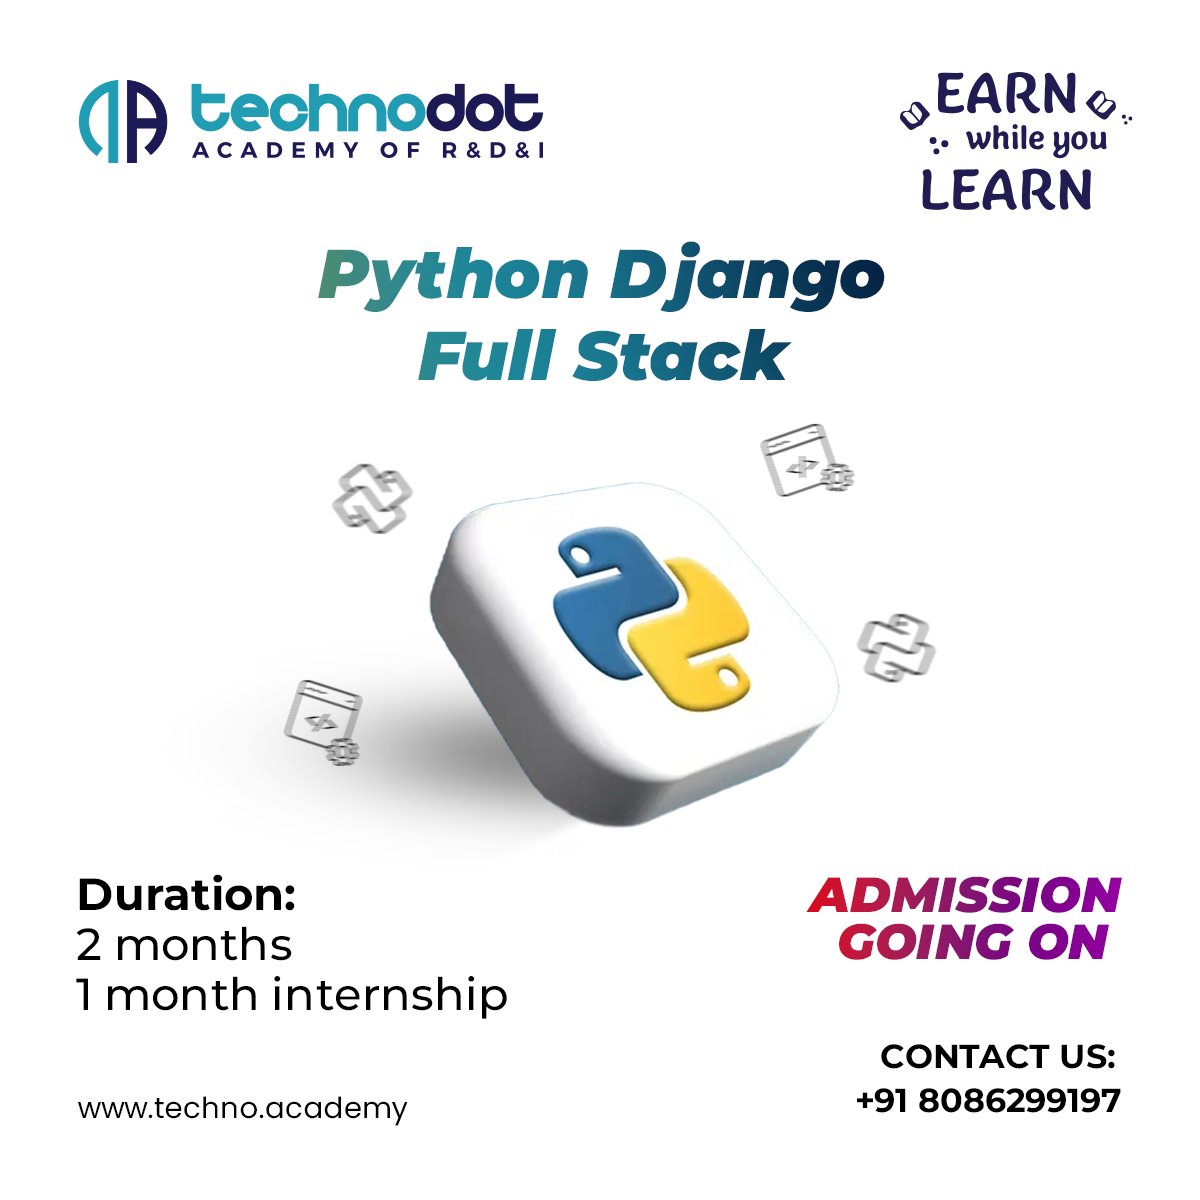 Join our job-oriented courses and start a successful career.

ADMISSION GOING ON

Enroll Now
Call:+91 8086299197

#TechnoDotAcademy #kerala #calicut